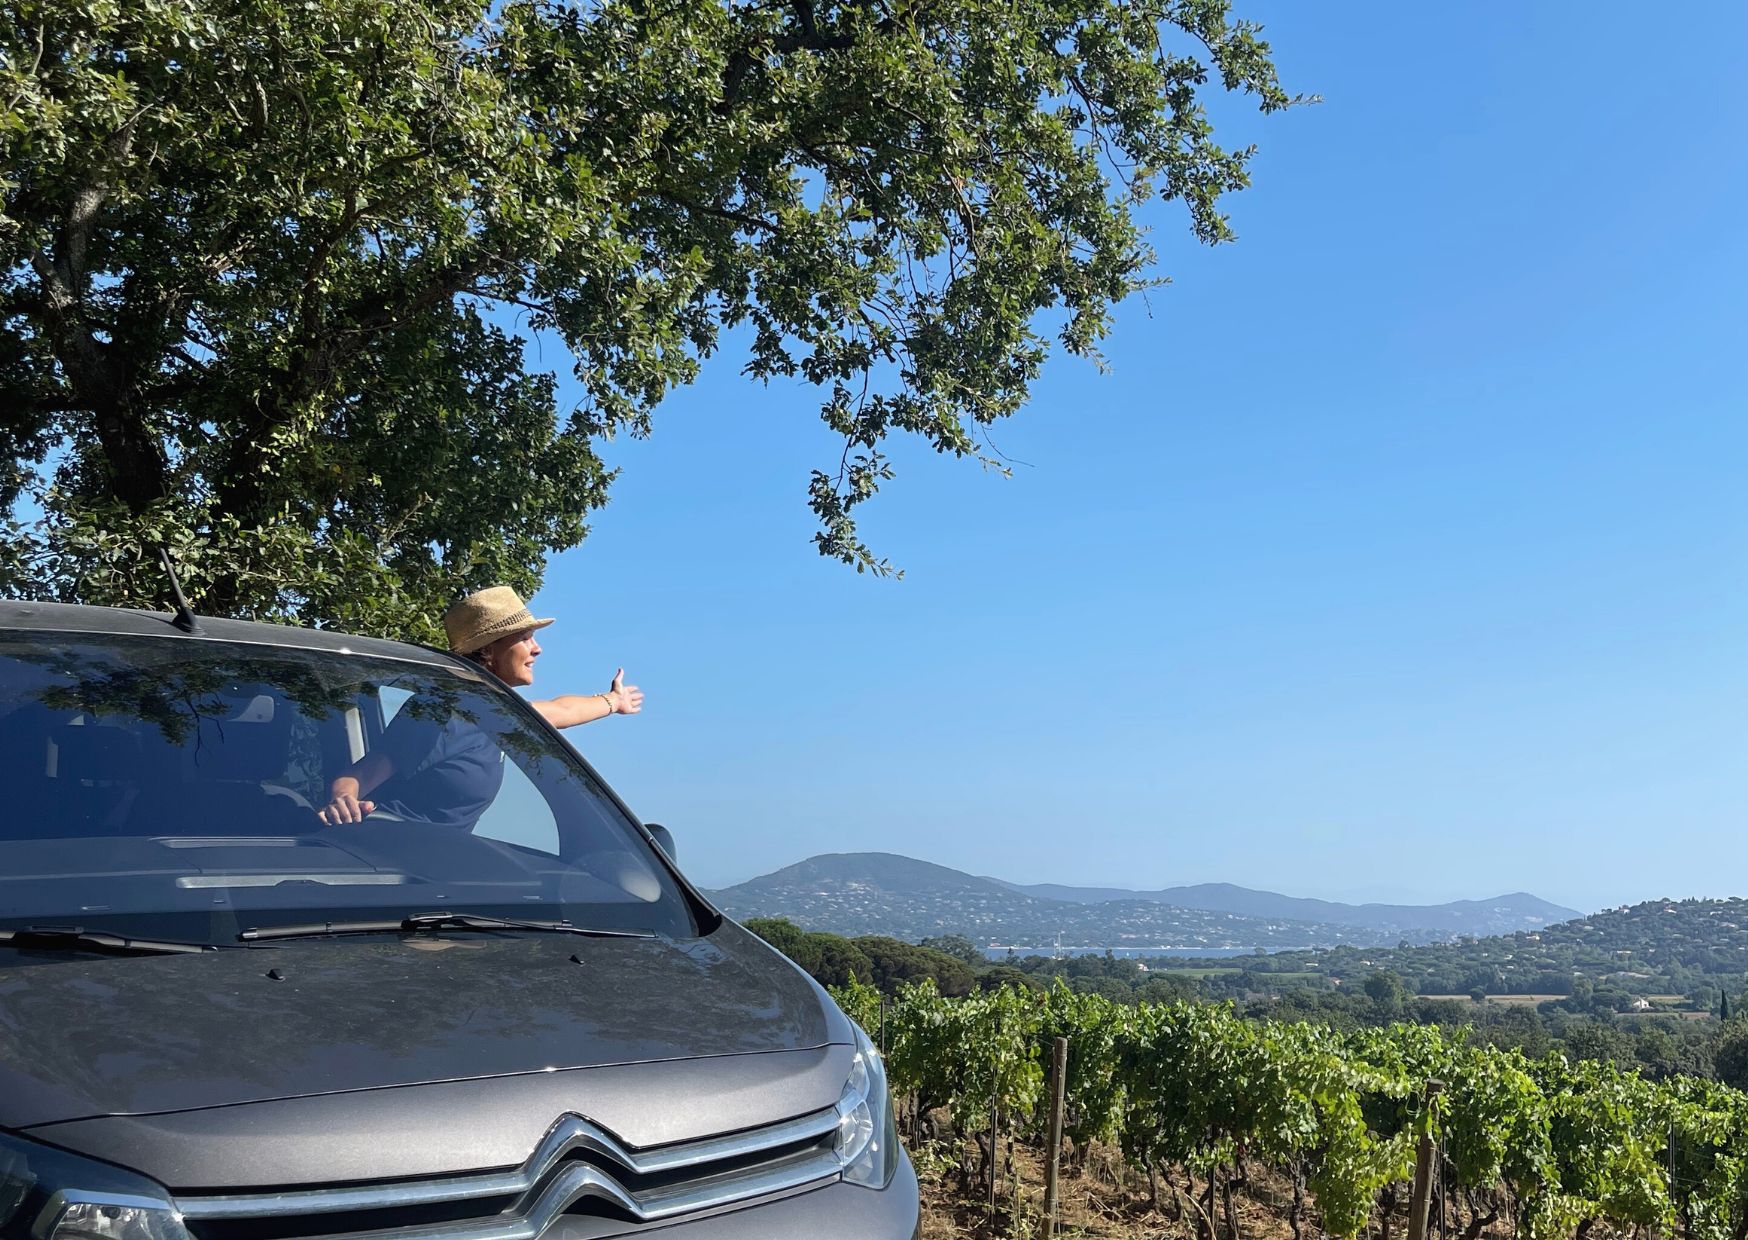 landscape wine tasting love rosé wine tour in van with wine guide from saint tropez small groups